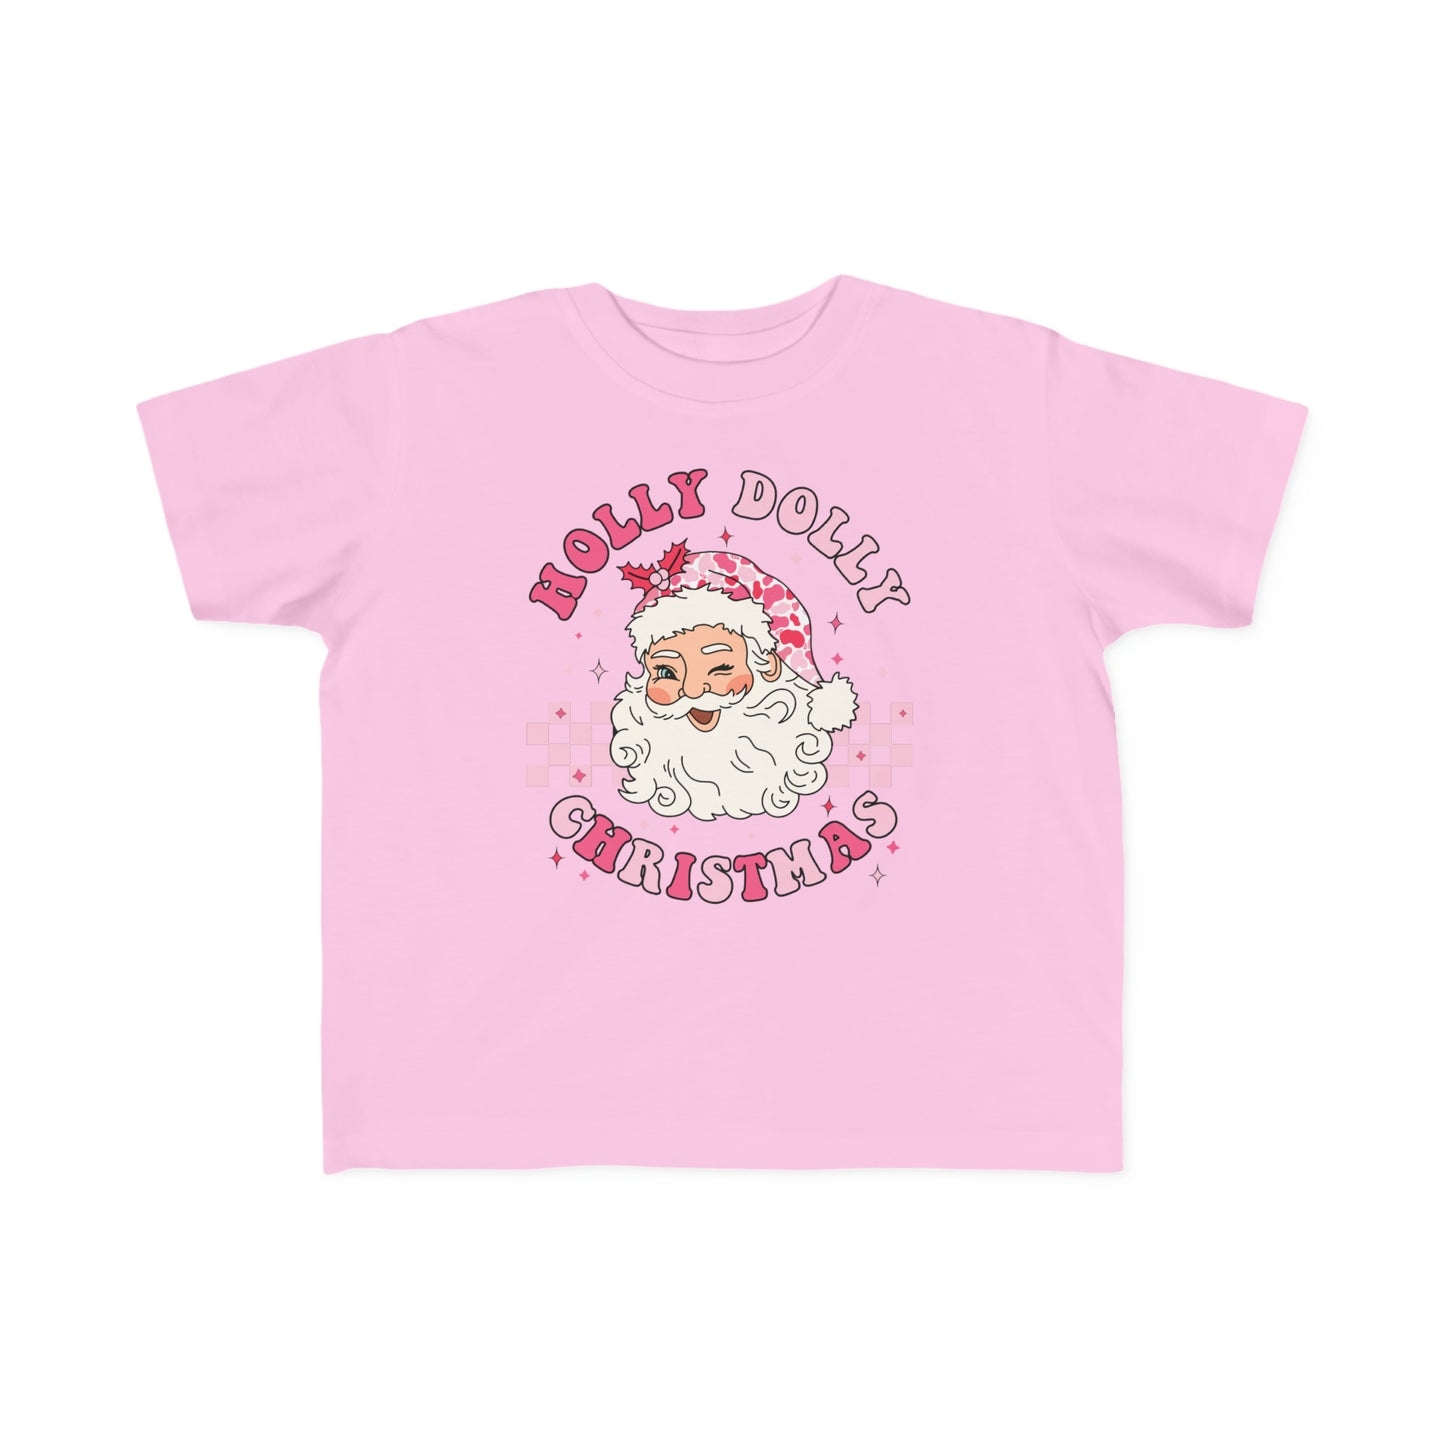 Holly Dolly Christmas Toddler's Fine Jersey Tee